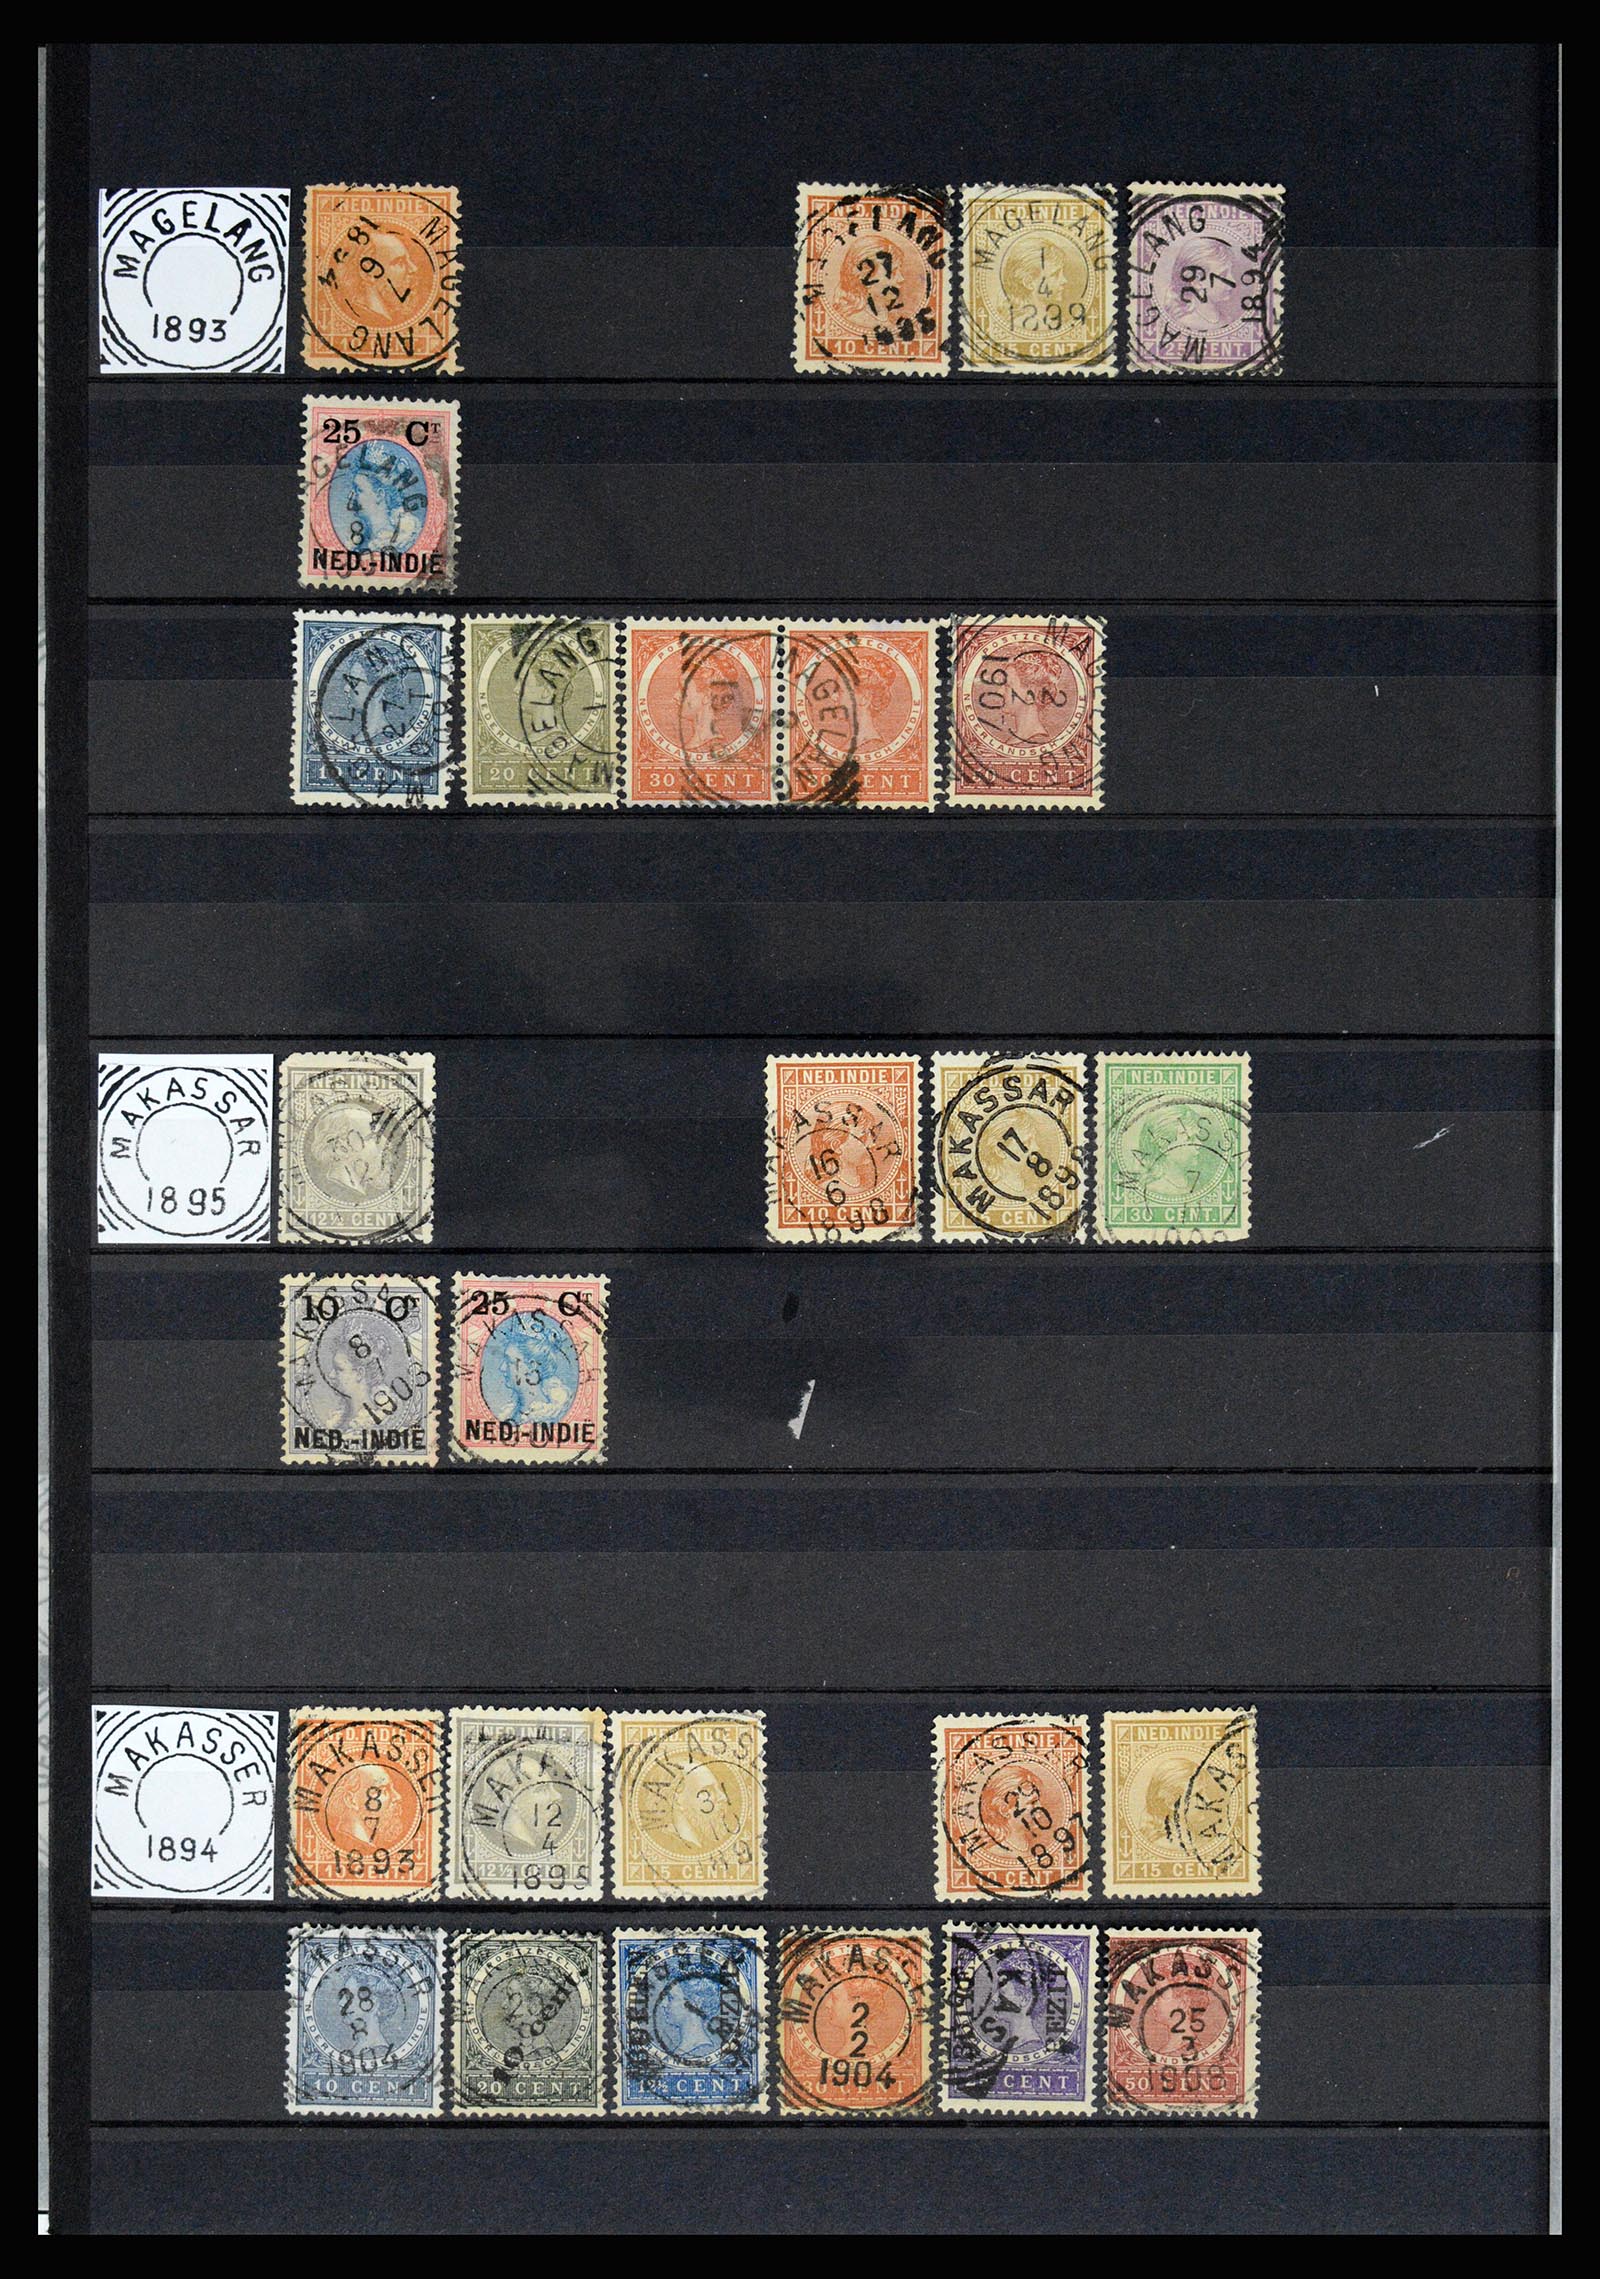 36839 027 - Stamp collection 36839 Dutch east Indies square cancels.